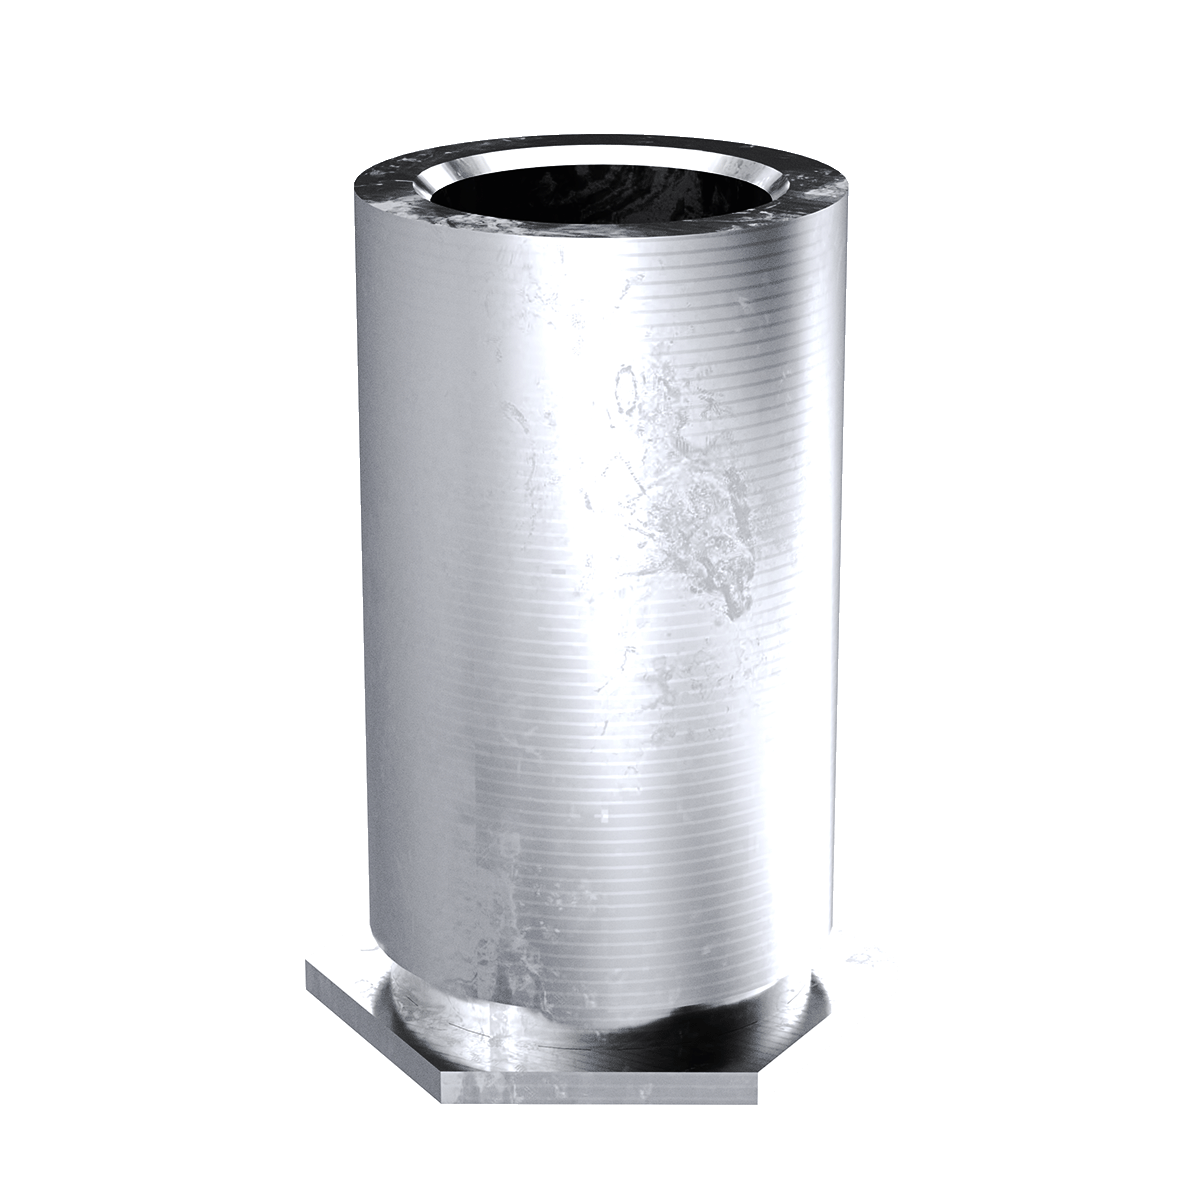 Self-Clinching Standoff, Through Unthreaded, 300 Series Stainless Steel, Passivated, 0.194 x 0.562, 100 Pack